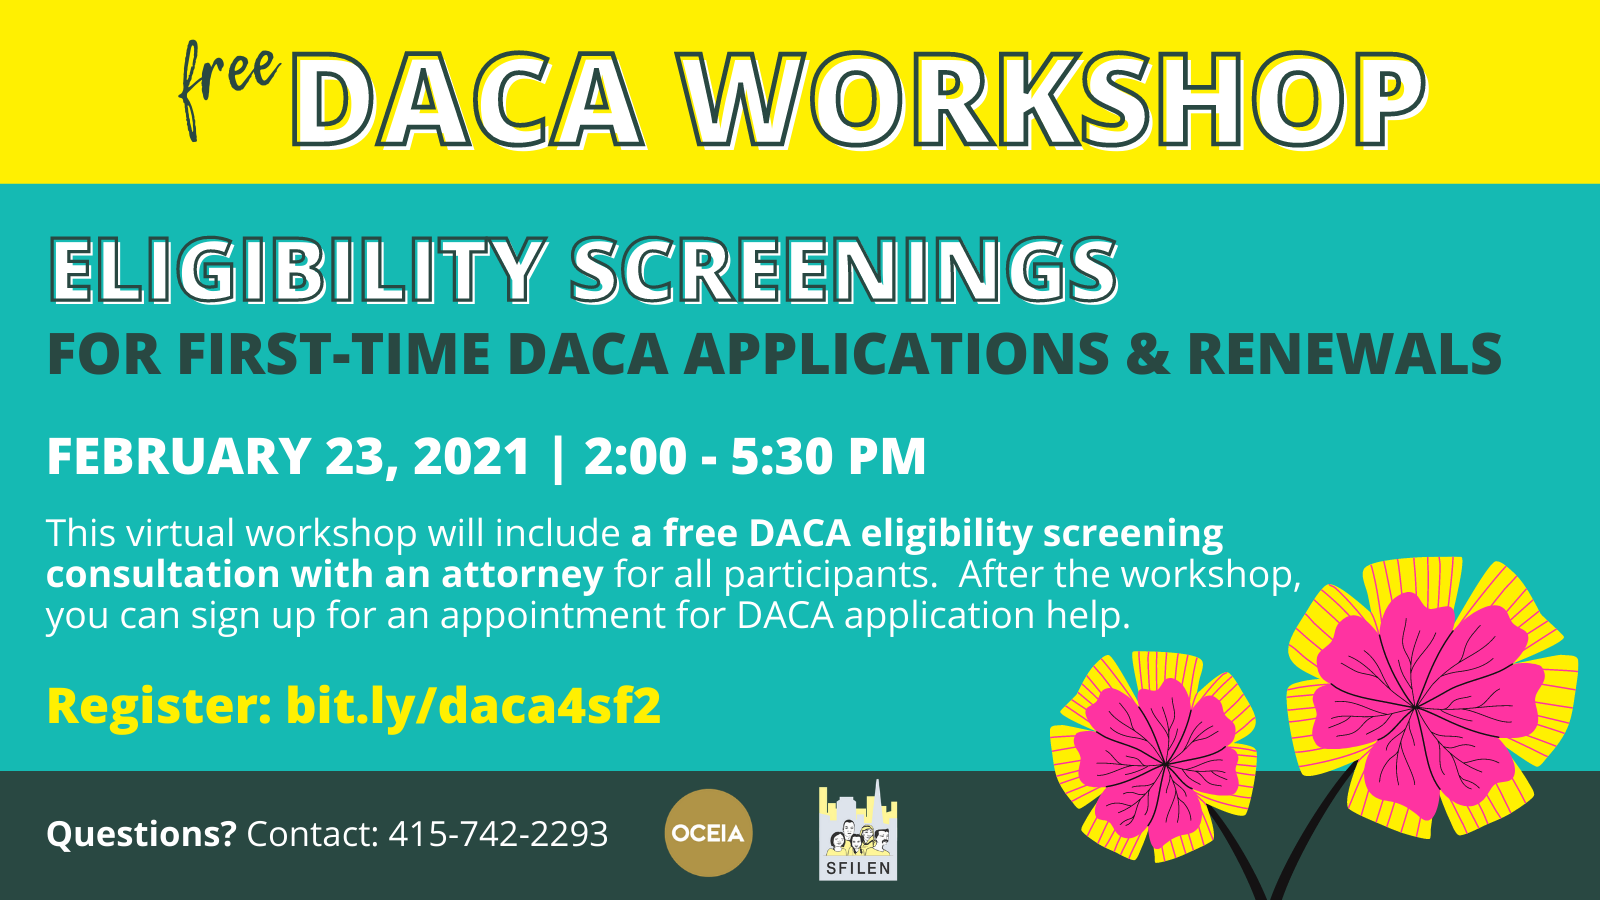 Free DACA Workshop. Eligibility Screenings for first-time DACA applicants and renewals. February 23, 2021 | 2:00-5:30PM Pacific Time. This virtual workshop will include a free DACA eligibility screening consultation with an attorney for all participants. After the workshop, you can sign up for an appointment for DACA application help. Register: bit.ly/daca4sf2 Questions? Contact 415-742-2293